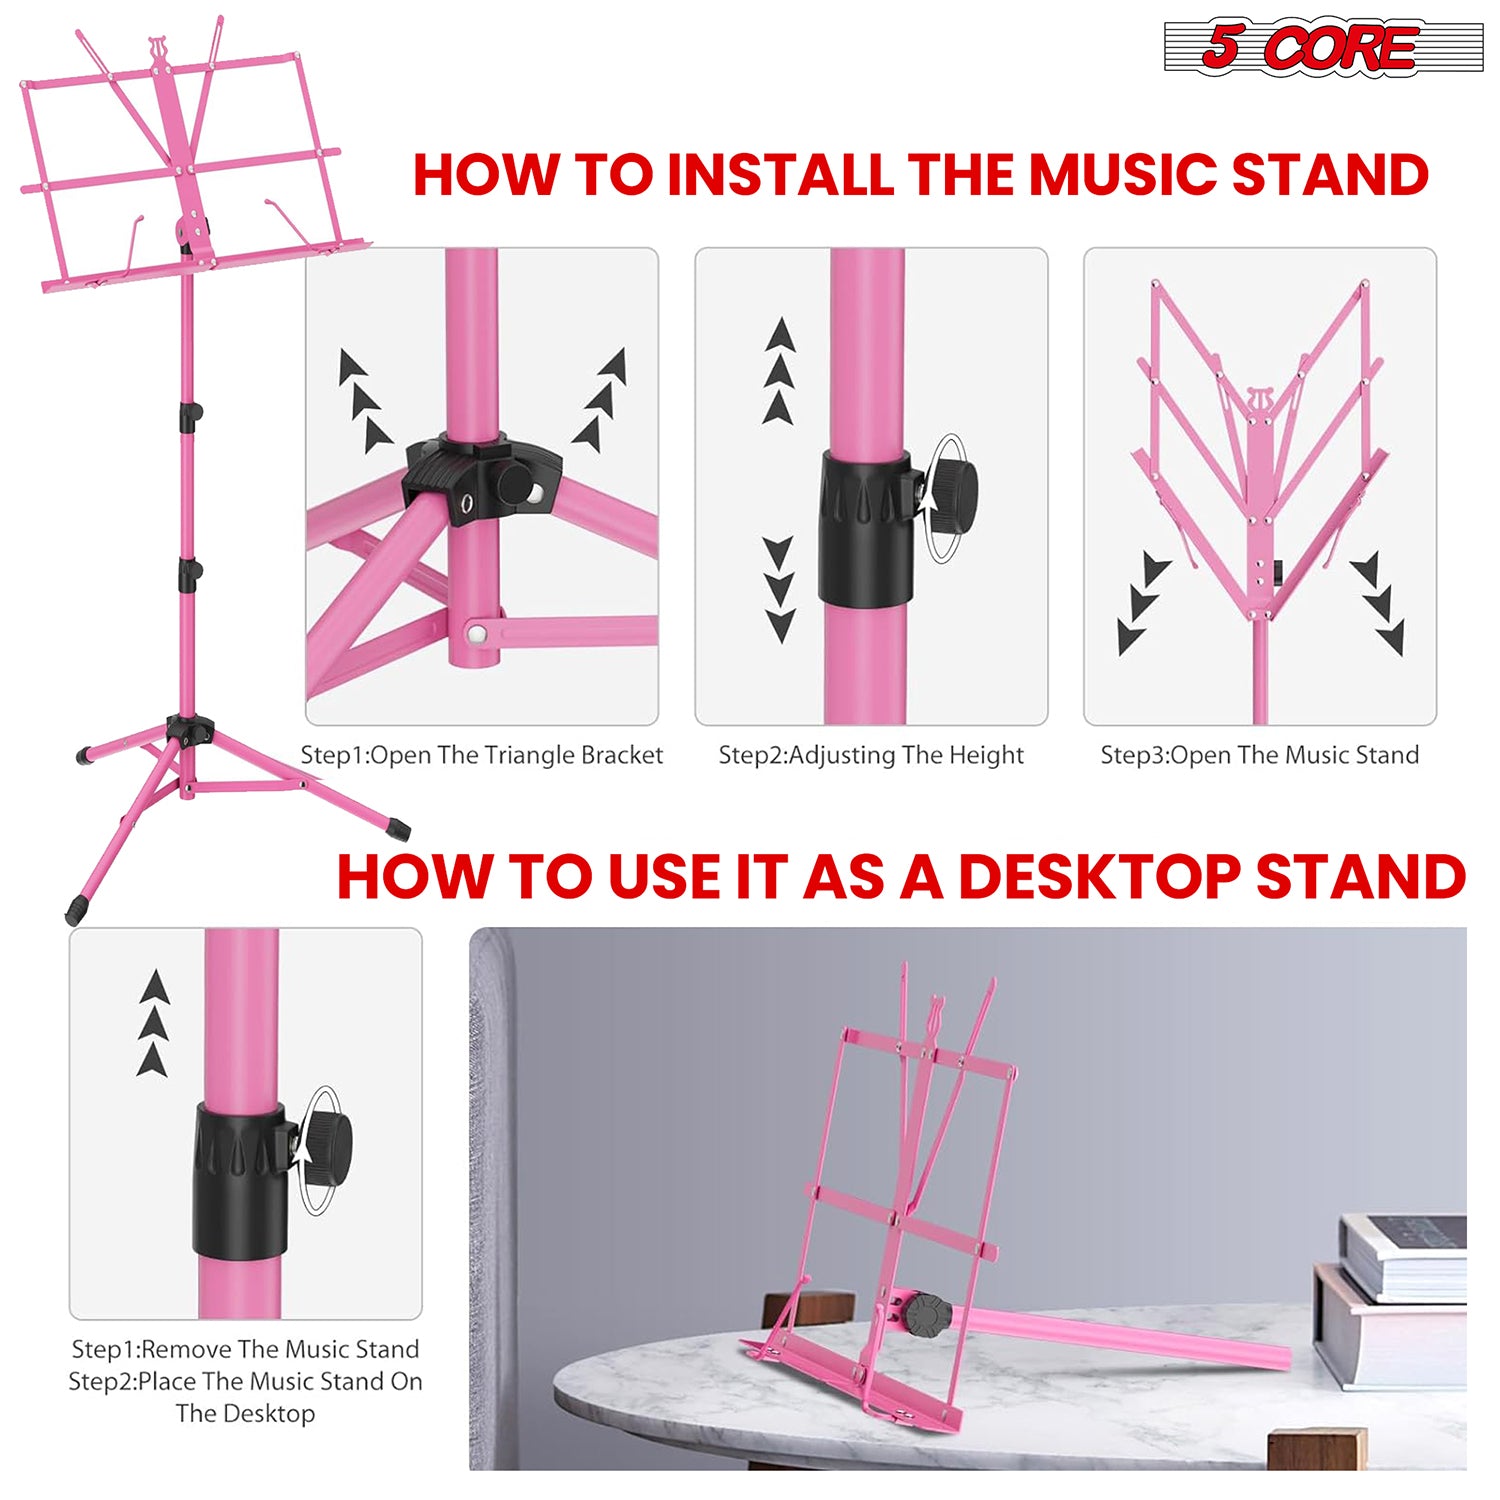 how to install the music stand